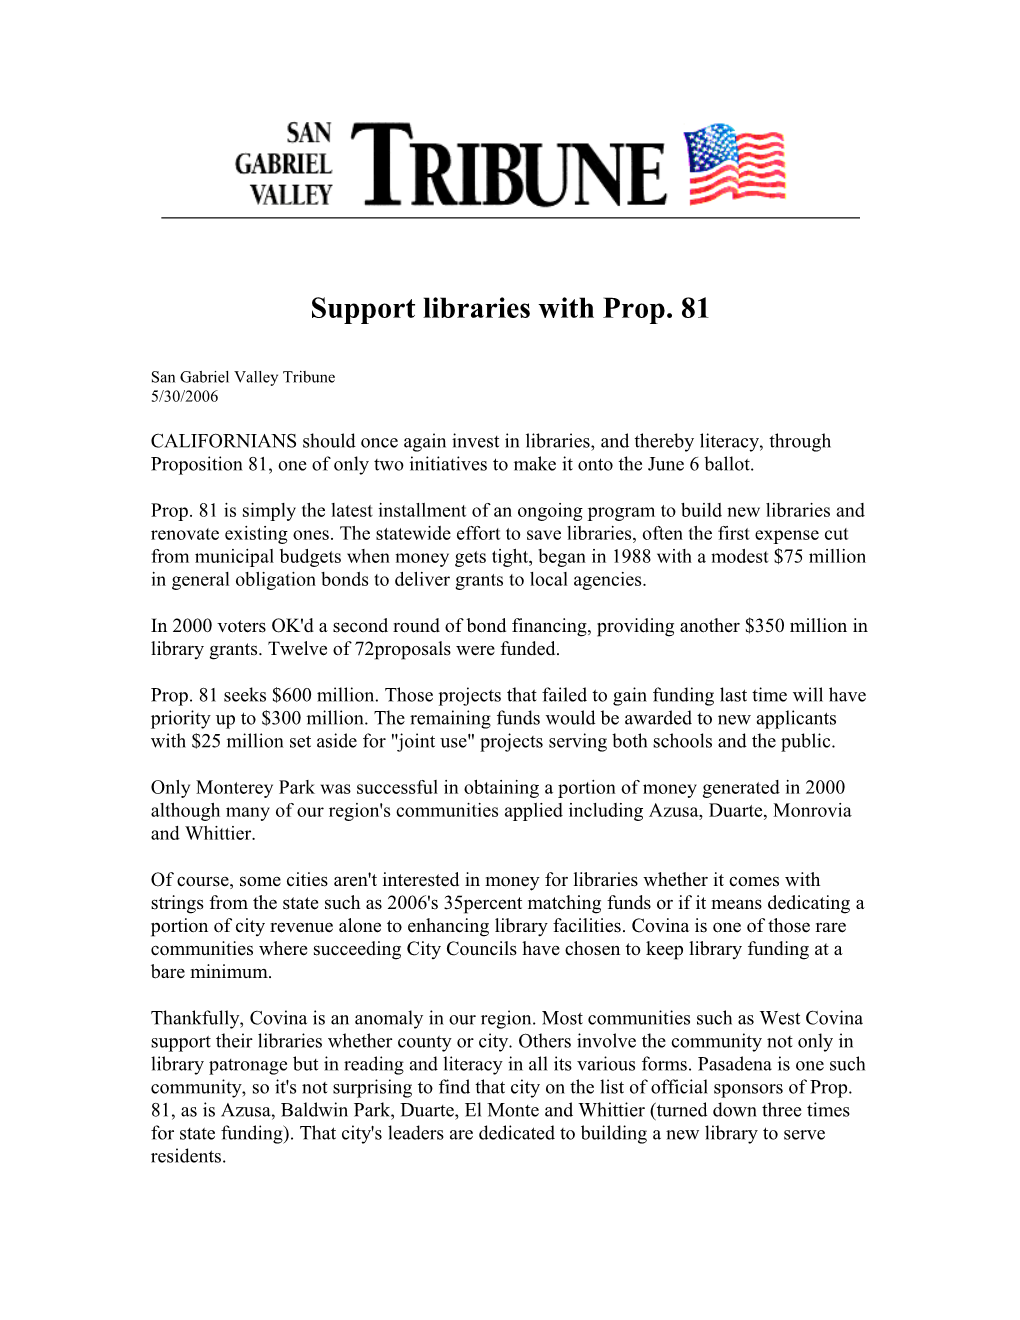 Support Libraries with Prop. 81